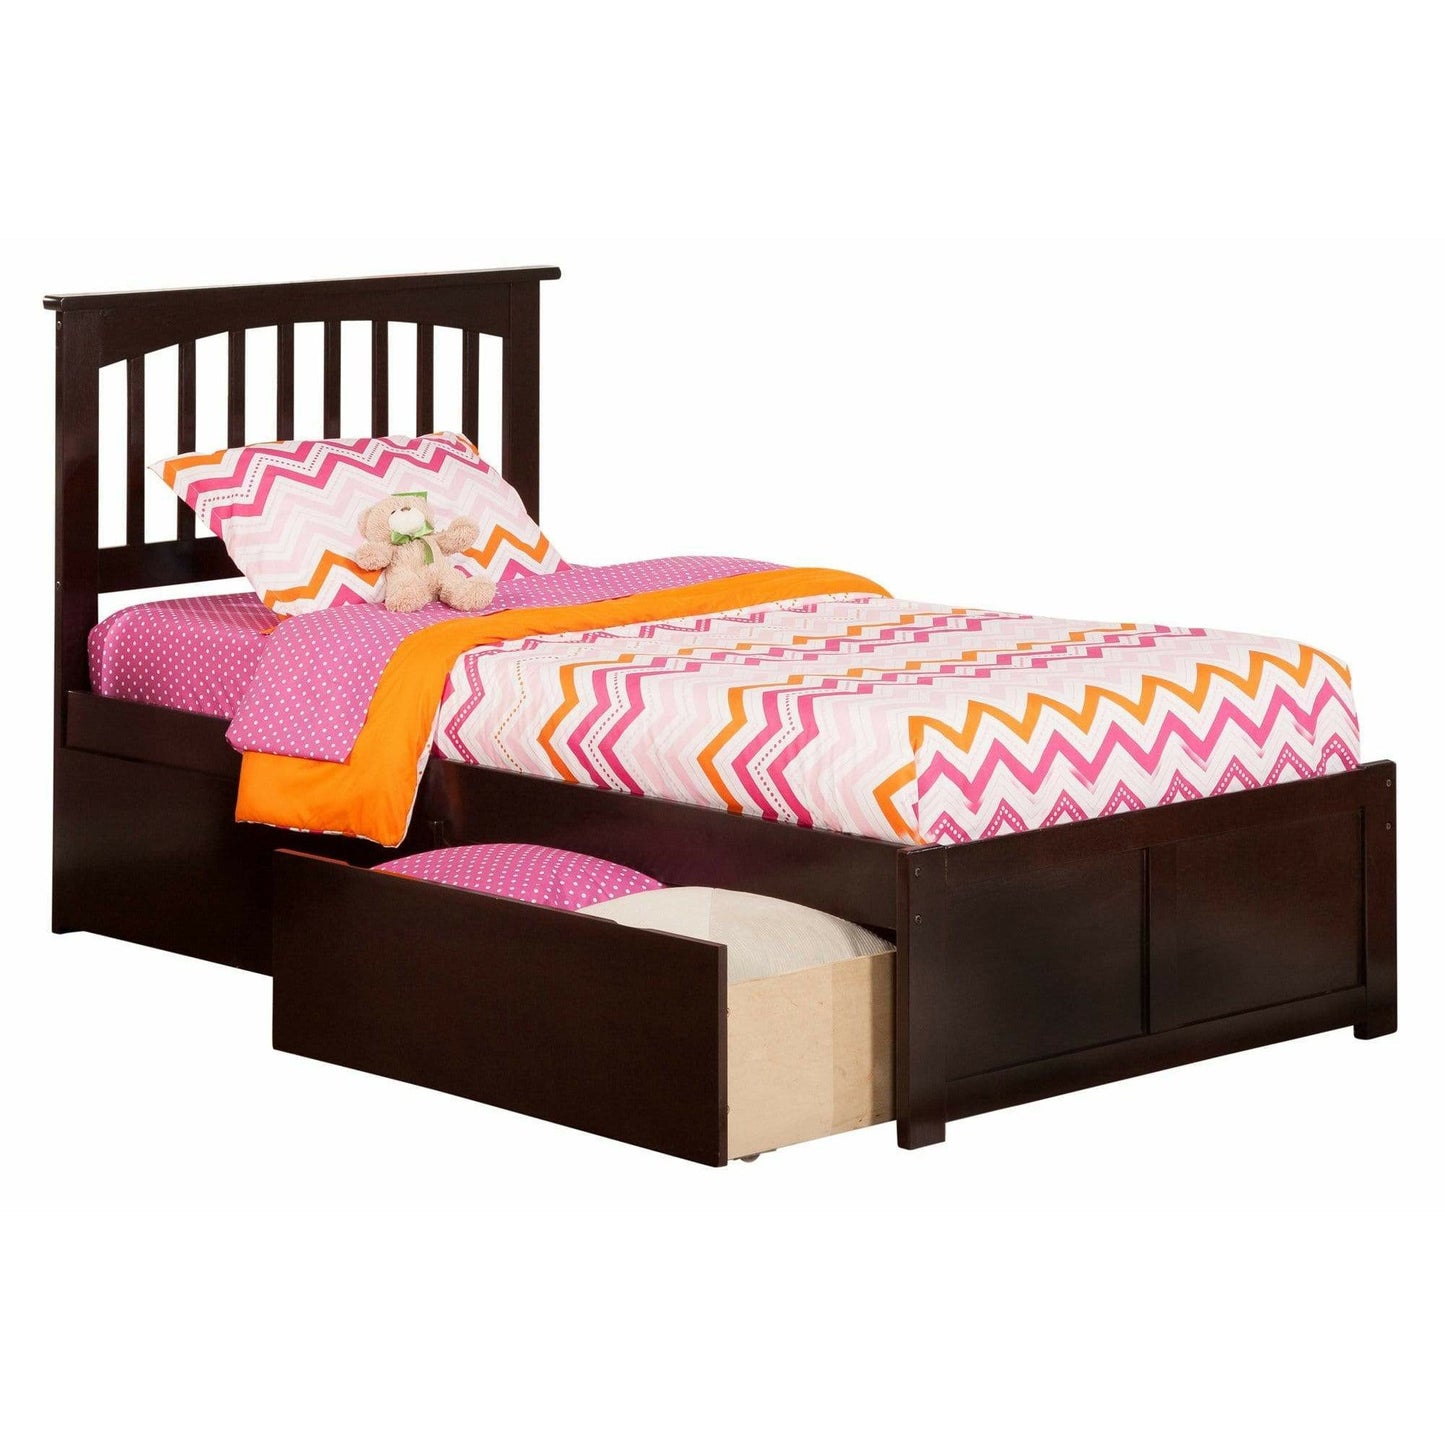 Atlantic Furniture Bed espresso Mission Twin XL Platform Bed with Flat Panel Foot Board and 2 Urban Bed Drawers in Espresso.